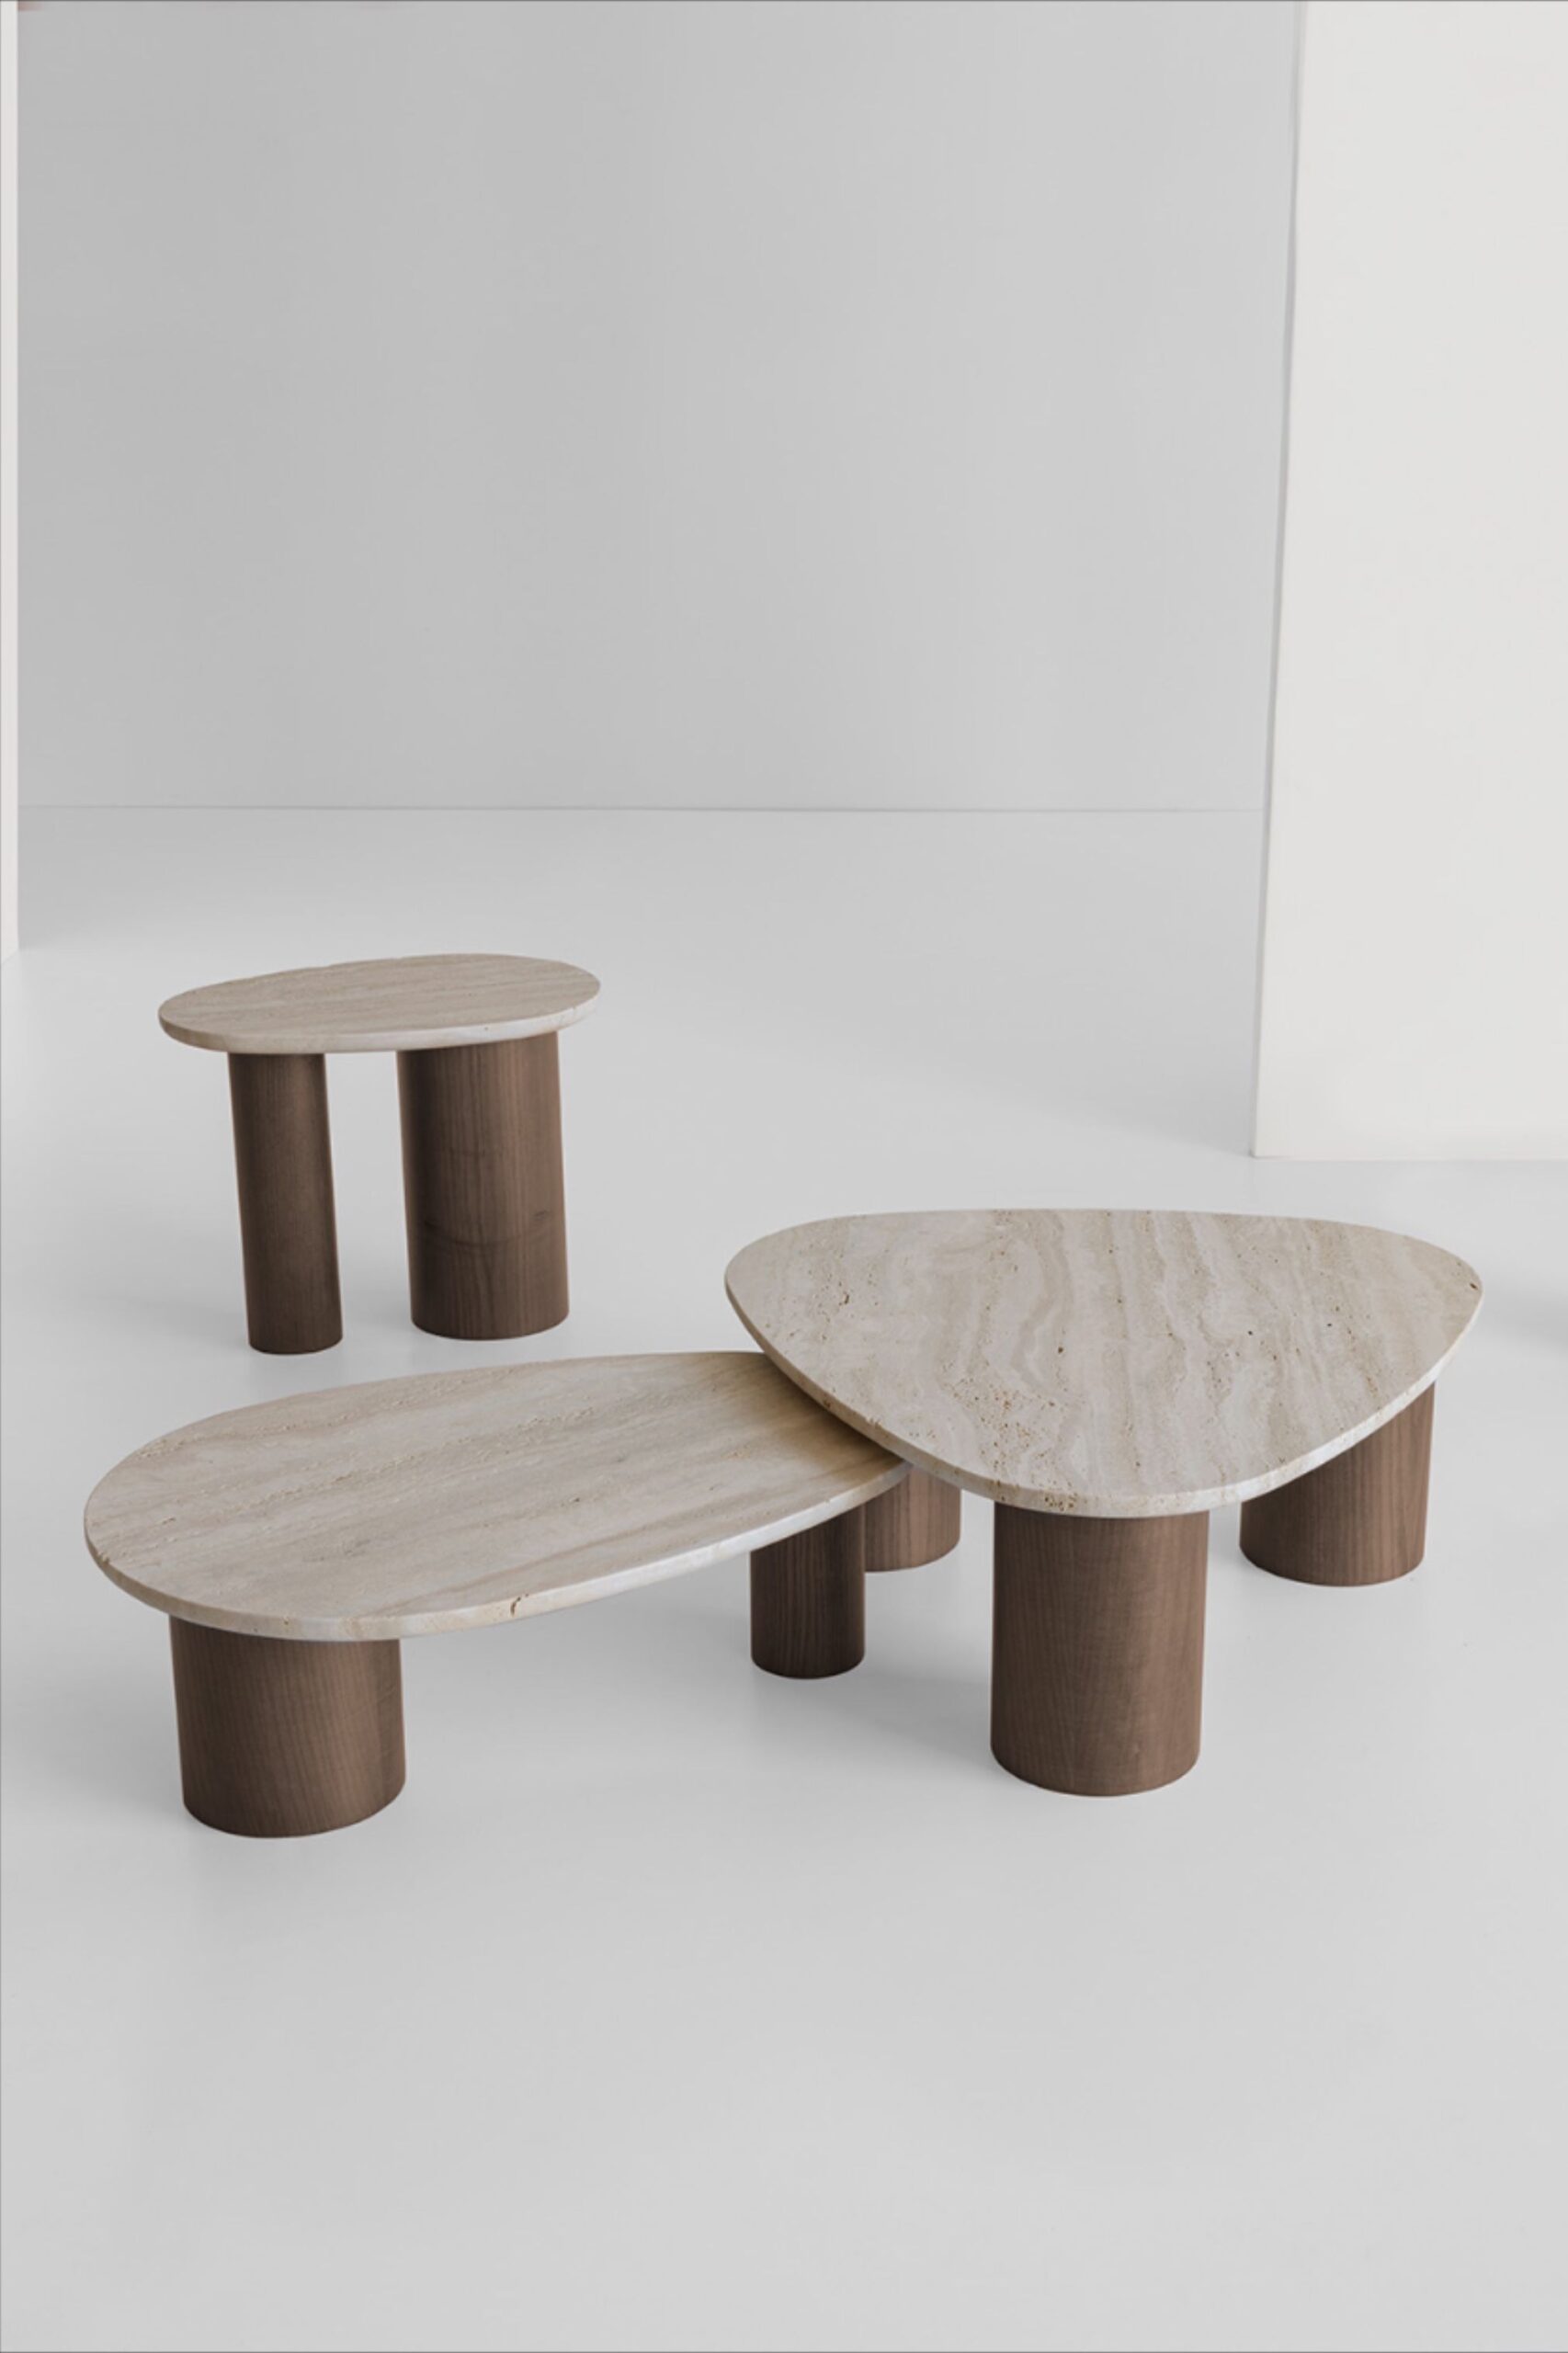 Show your status with the unique coffee
tables